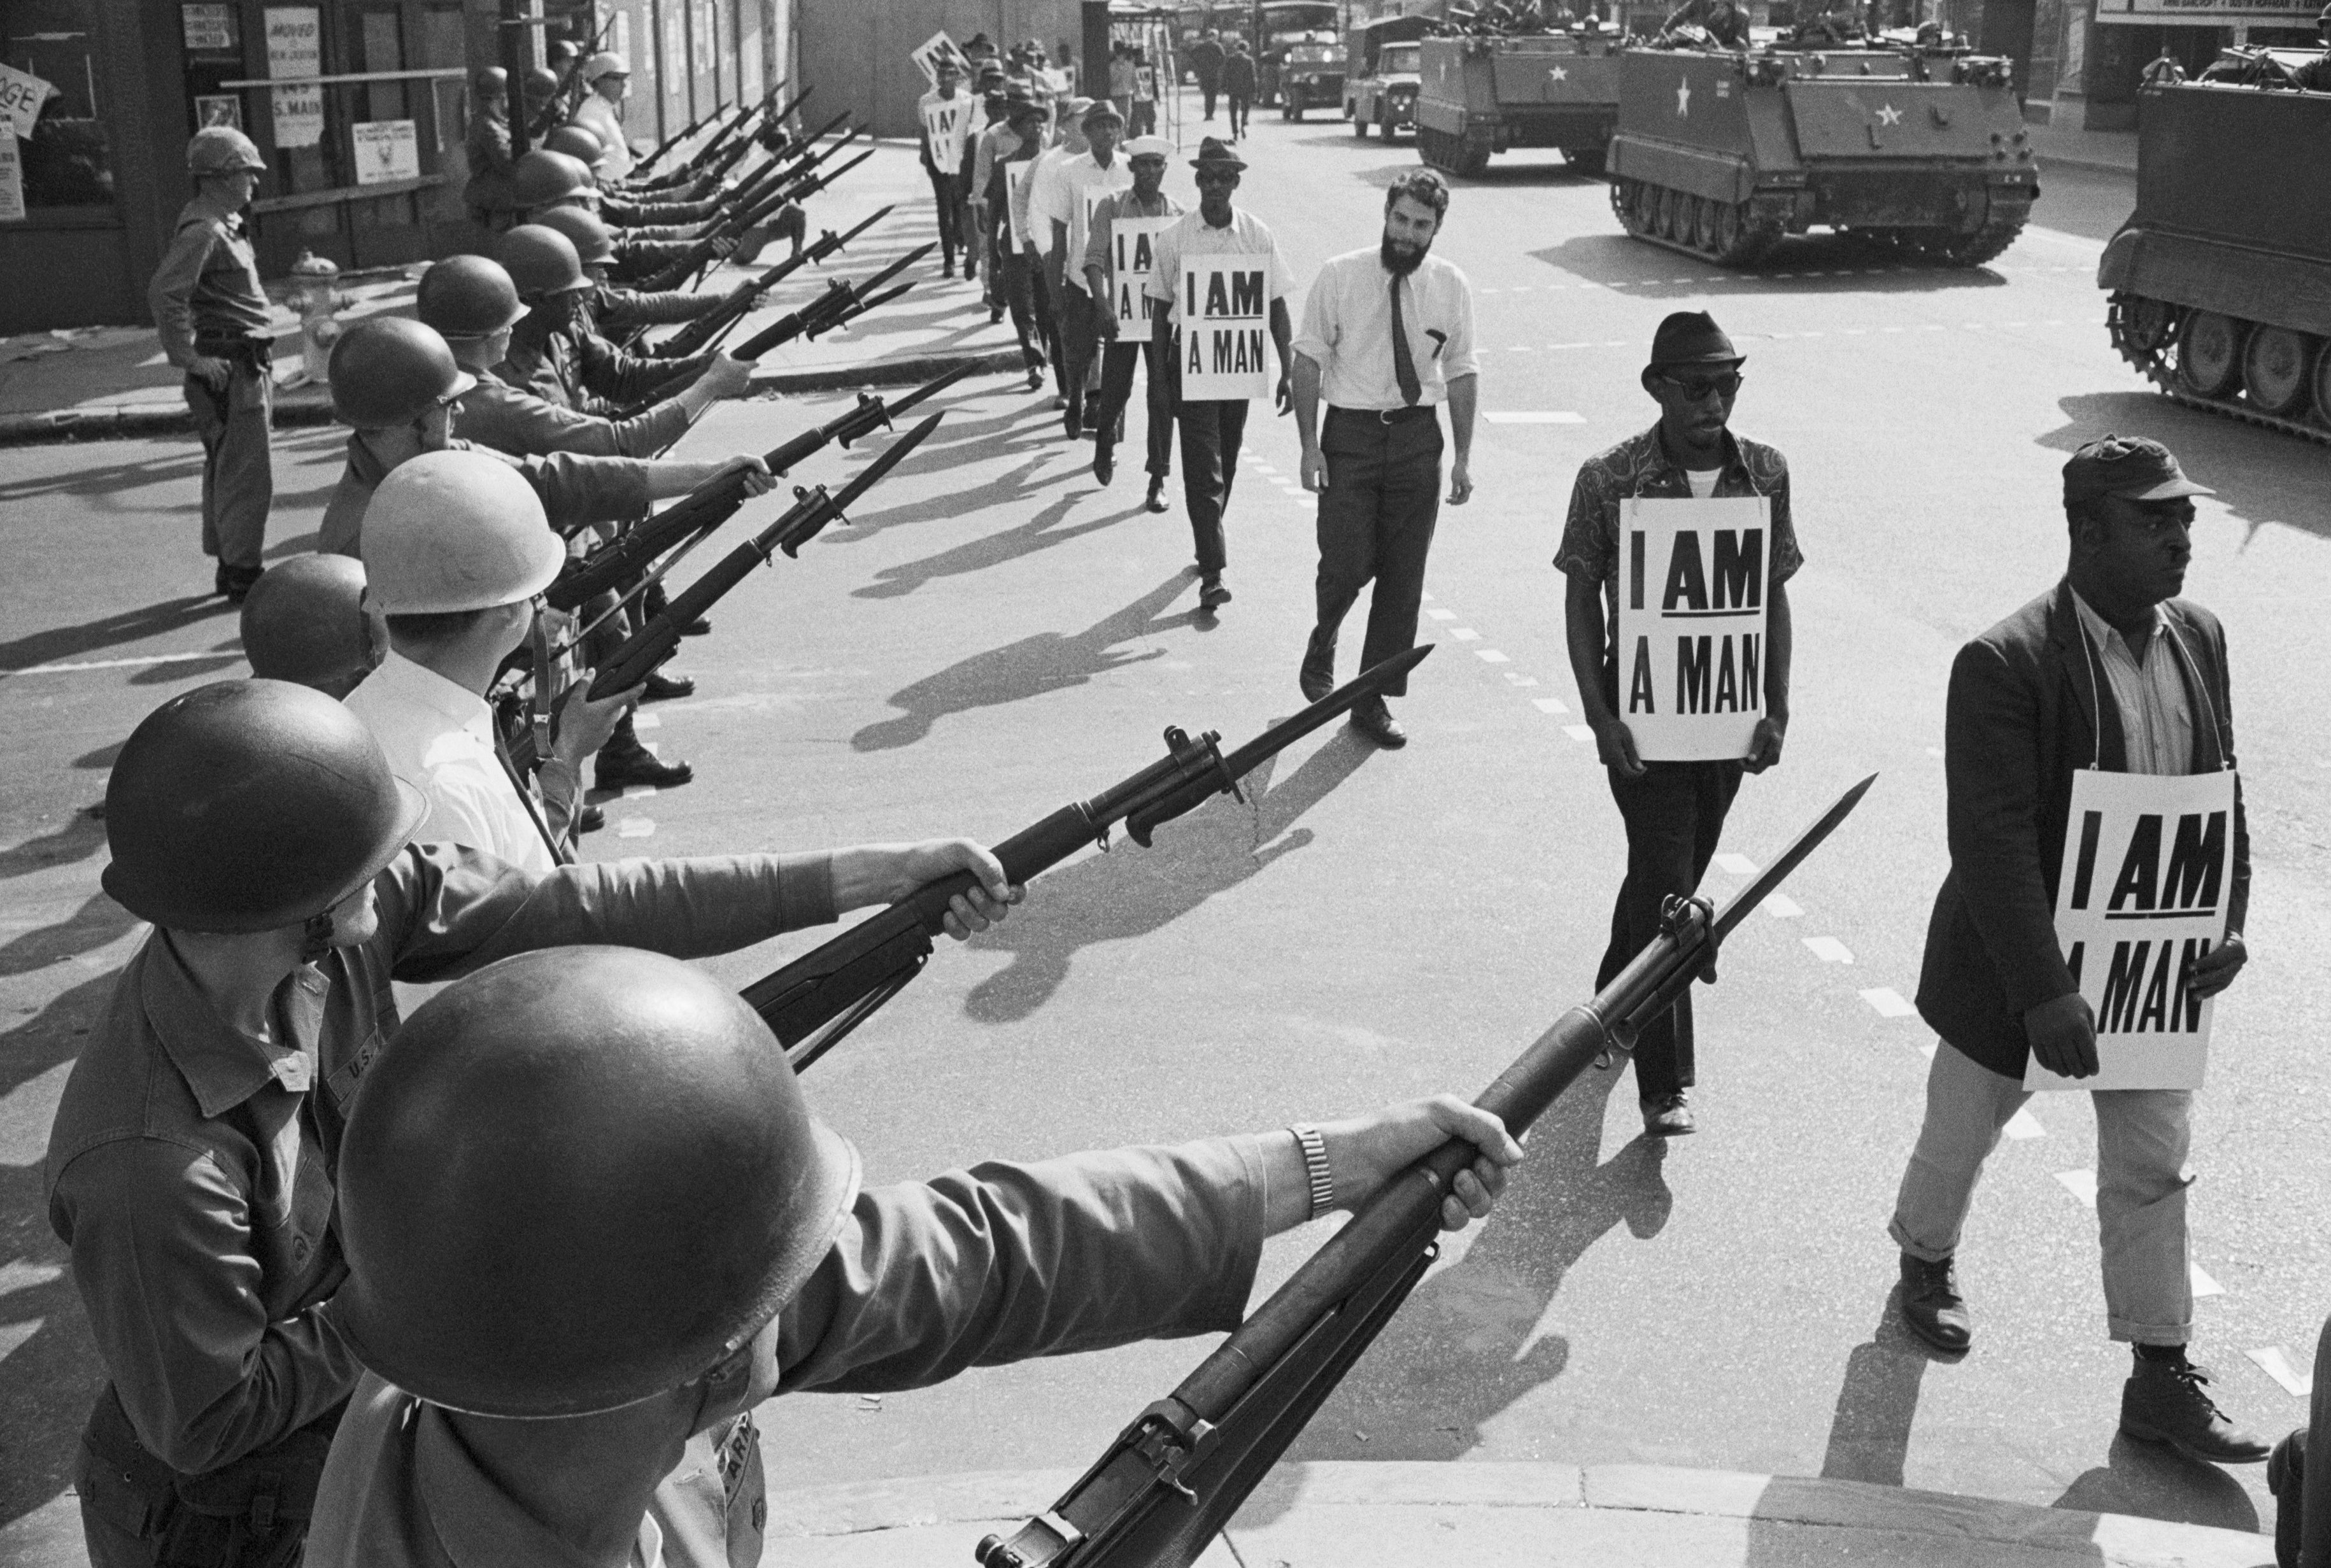 U.S. National Guard troops block off Beale Street in Memphis as Civil Rights marchers wearing placards reading, "I AM A MAN" pass by on March 29, 1968. 